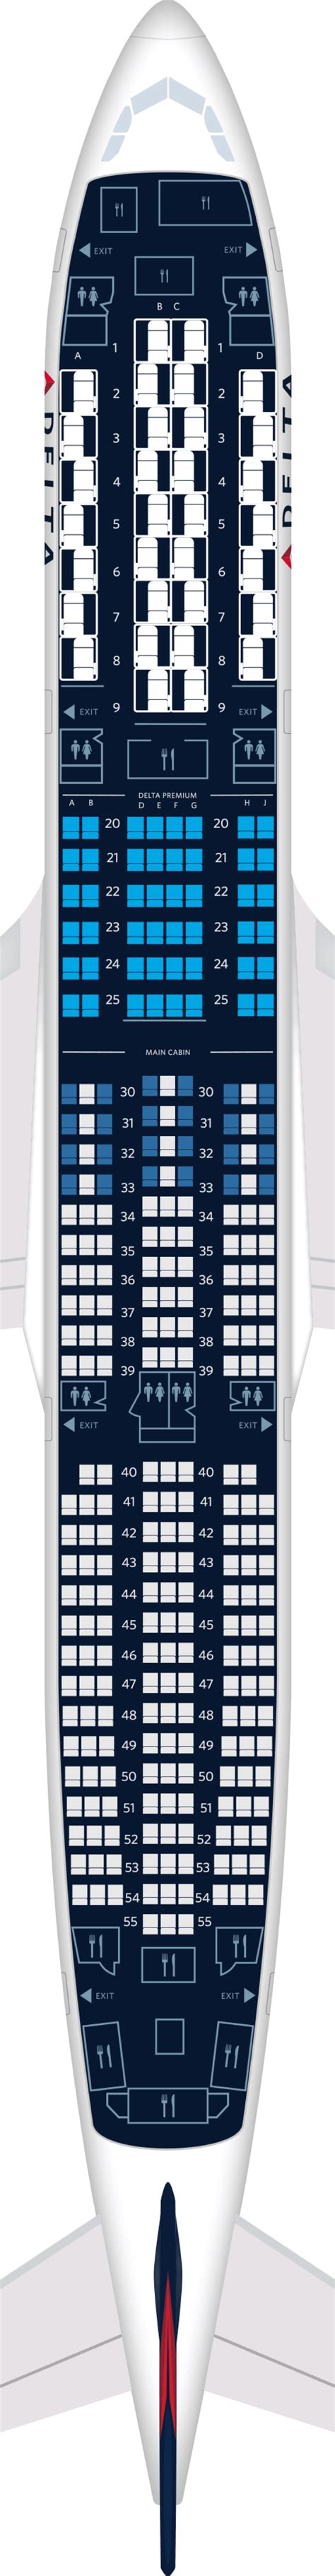 A350 941 seat map. Overview. Qatar Airways operates the Airbus A350 on a variety of long-haul flights. This aircraft is configured with only two classes of service where all Business Class seats feature 180 degree recline. This aircraft flies with 36 seats in Business Class and 247 seats in Economy. 